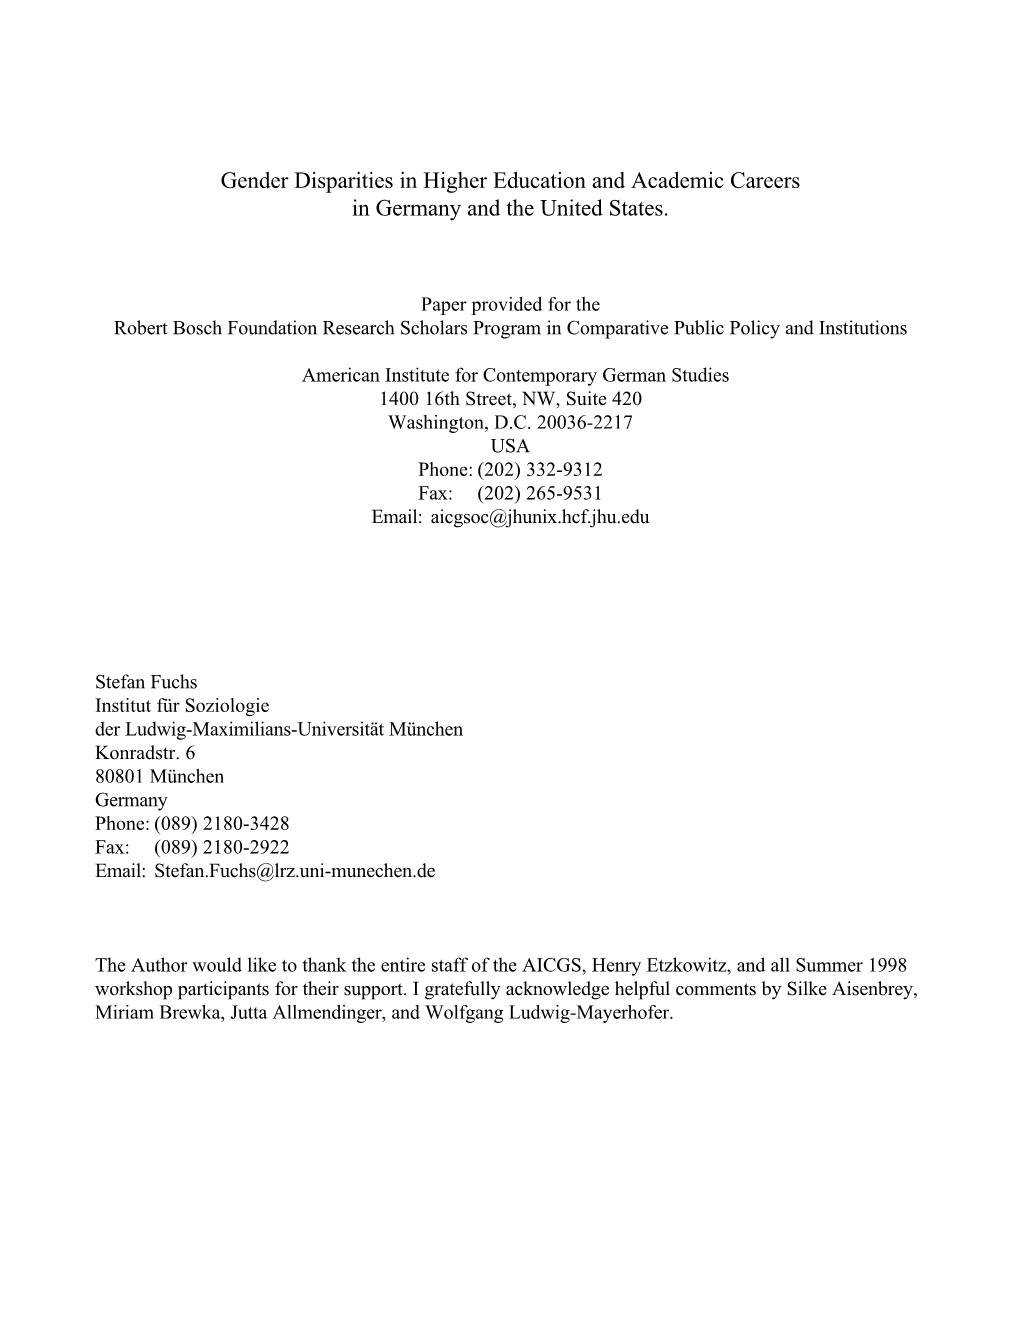 Gender Disparities in Higher Education and Academic Careers in Germany and the United States